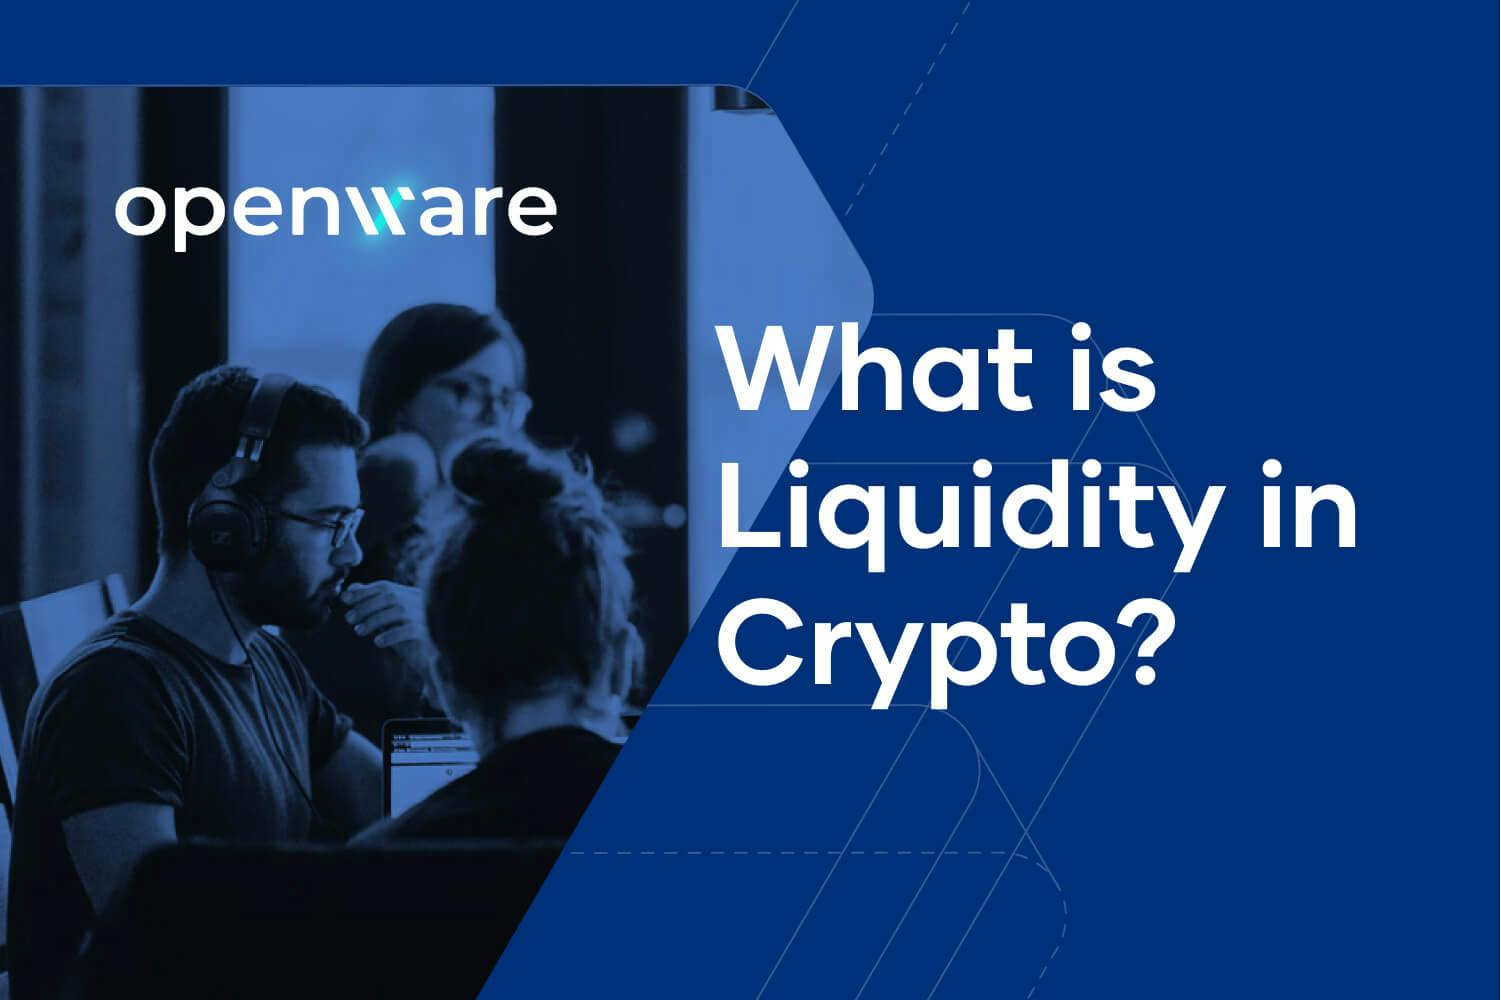 Image showing the works Openware and What is Liquidity in Crypto